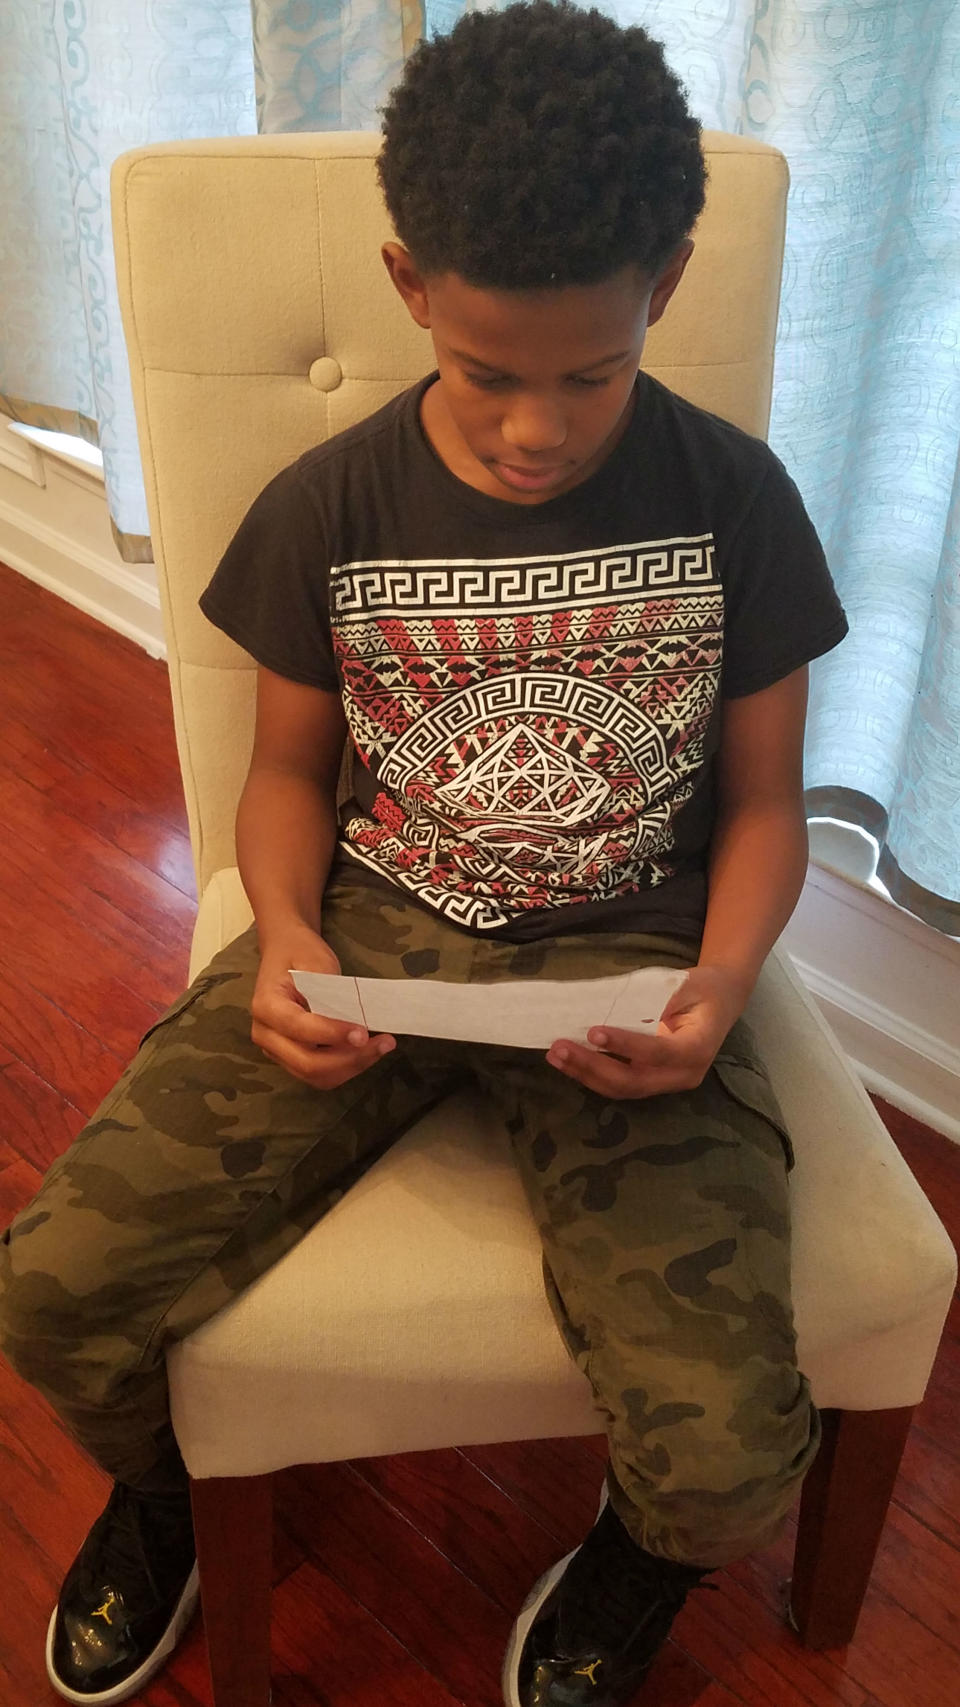 The boy’s mother “felt helpless” when her son read his letters to her. Source: Claudia Charles